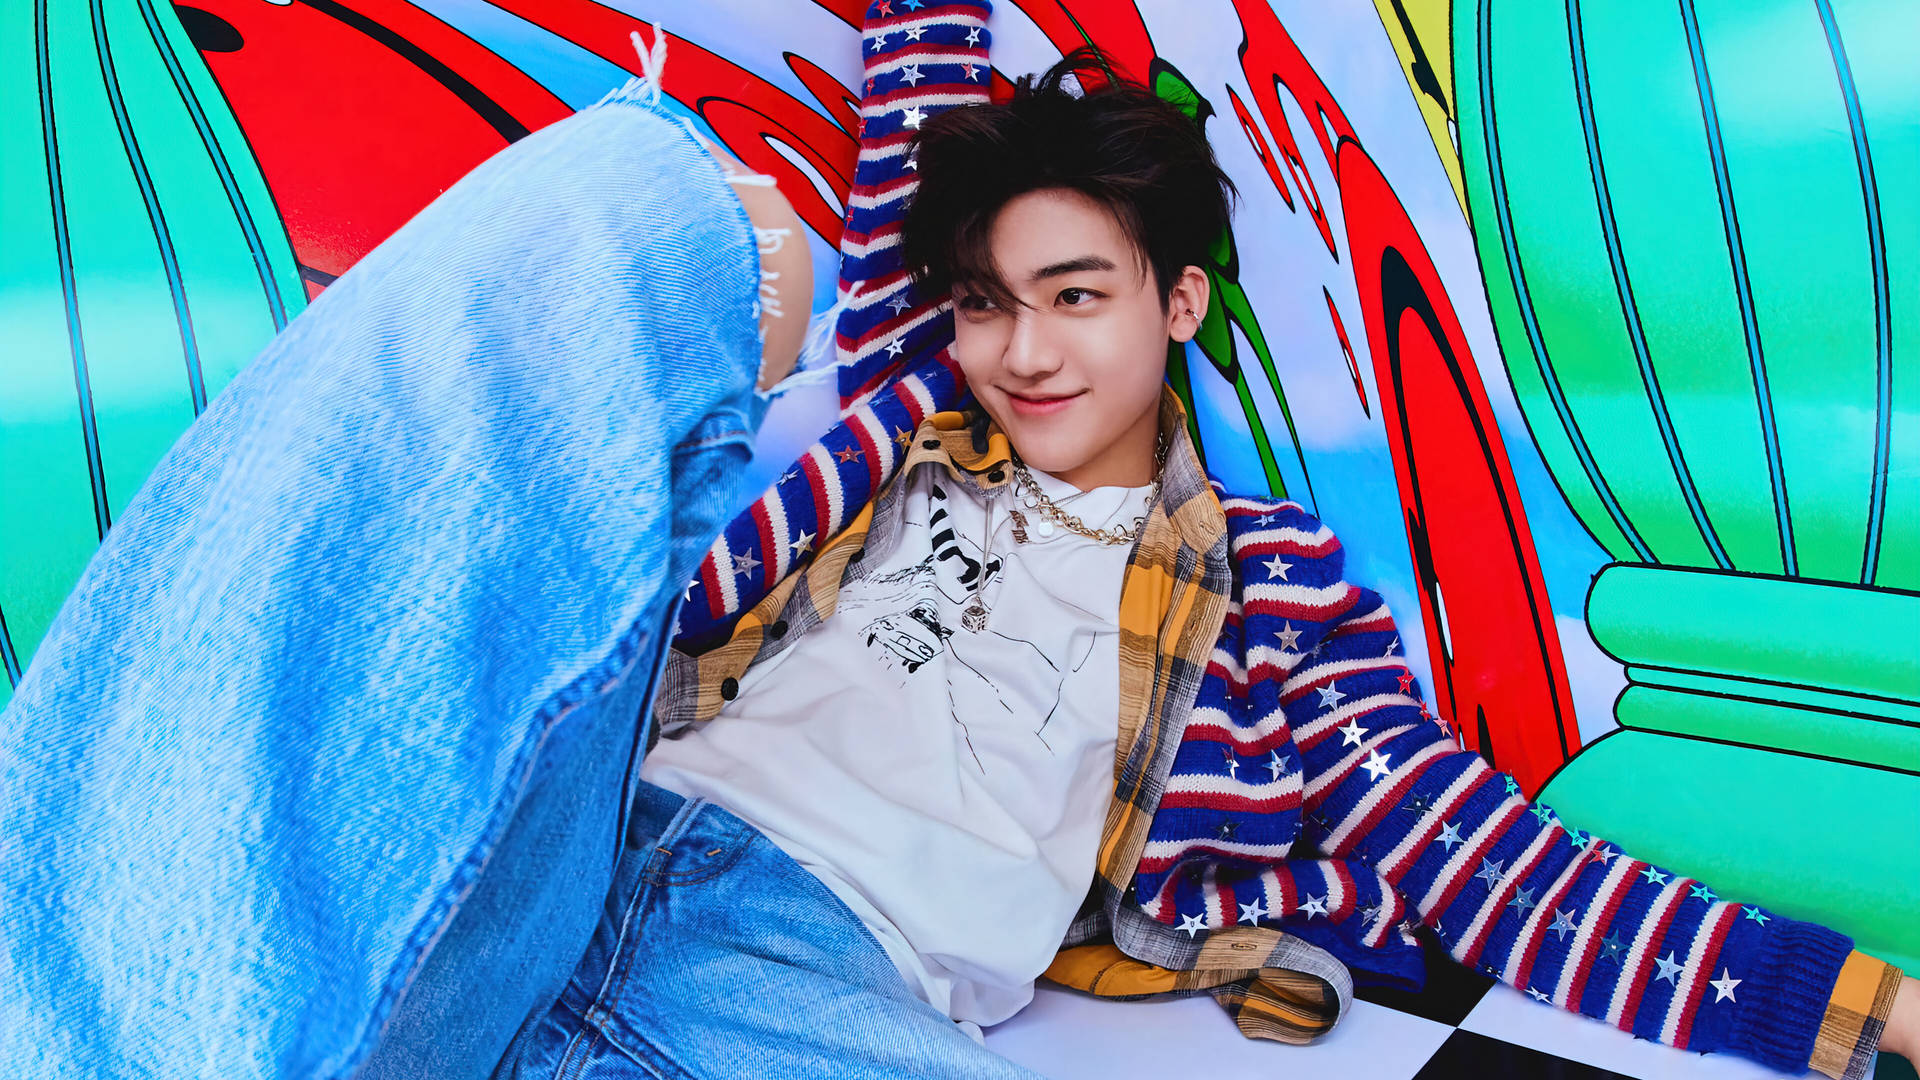 Jaemin Nct In Striped Sweater Background